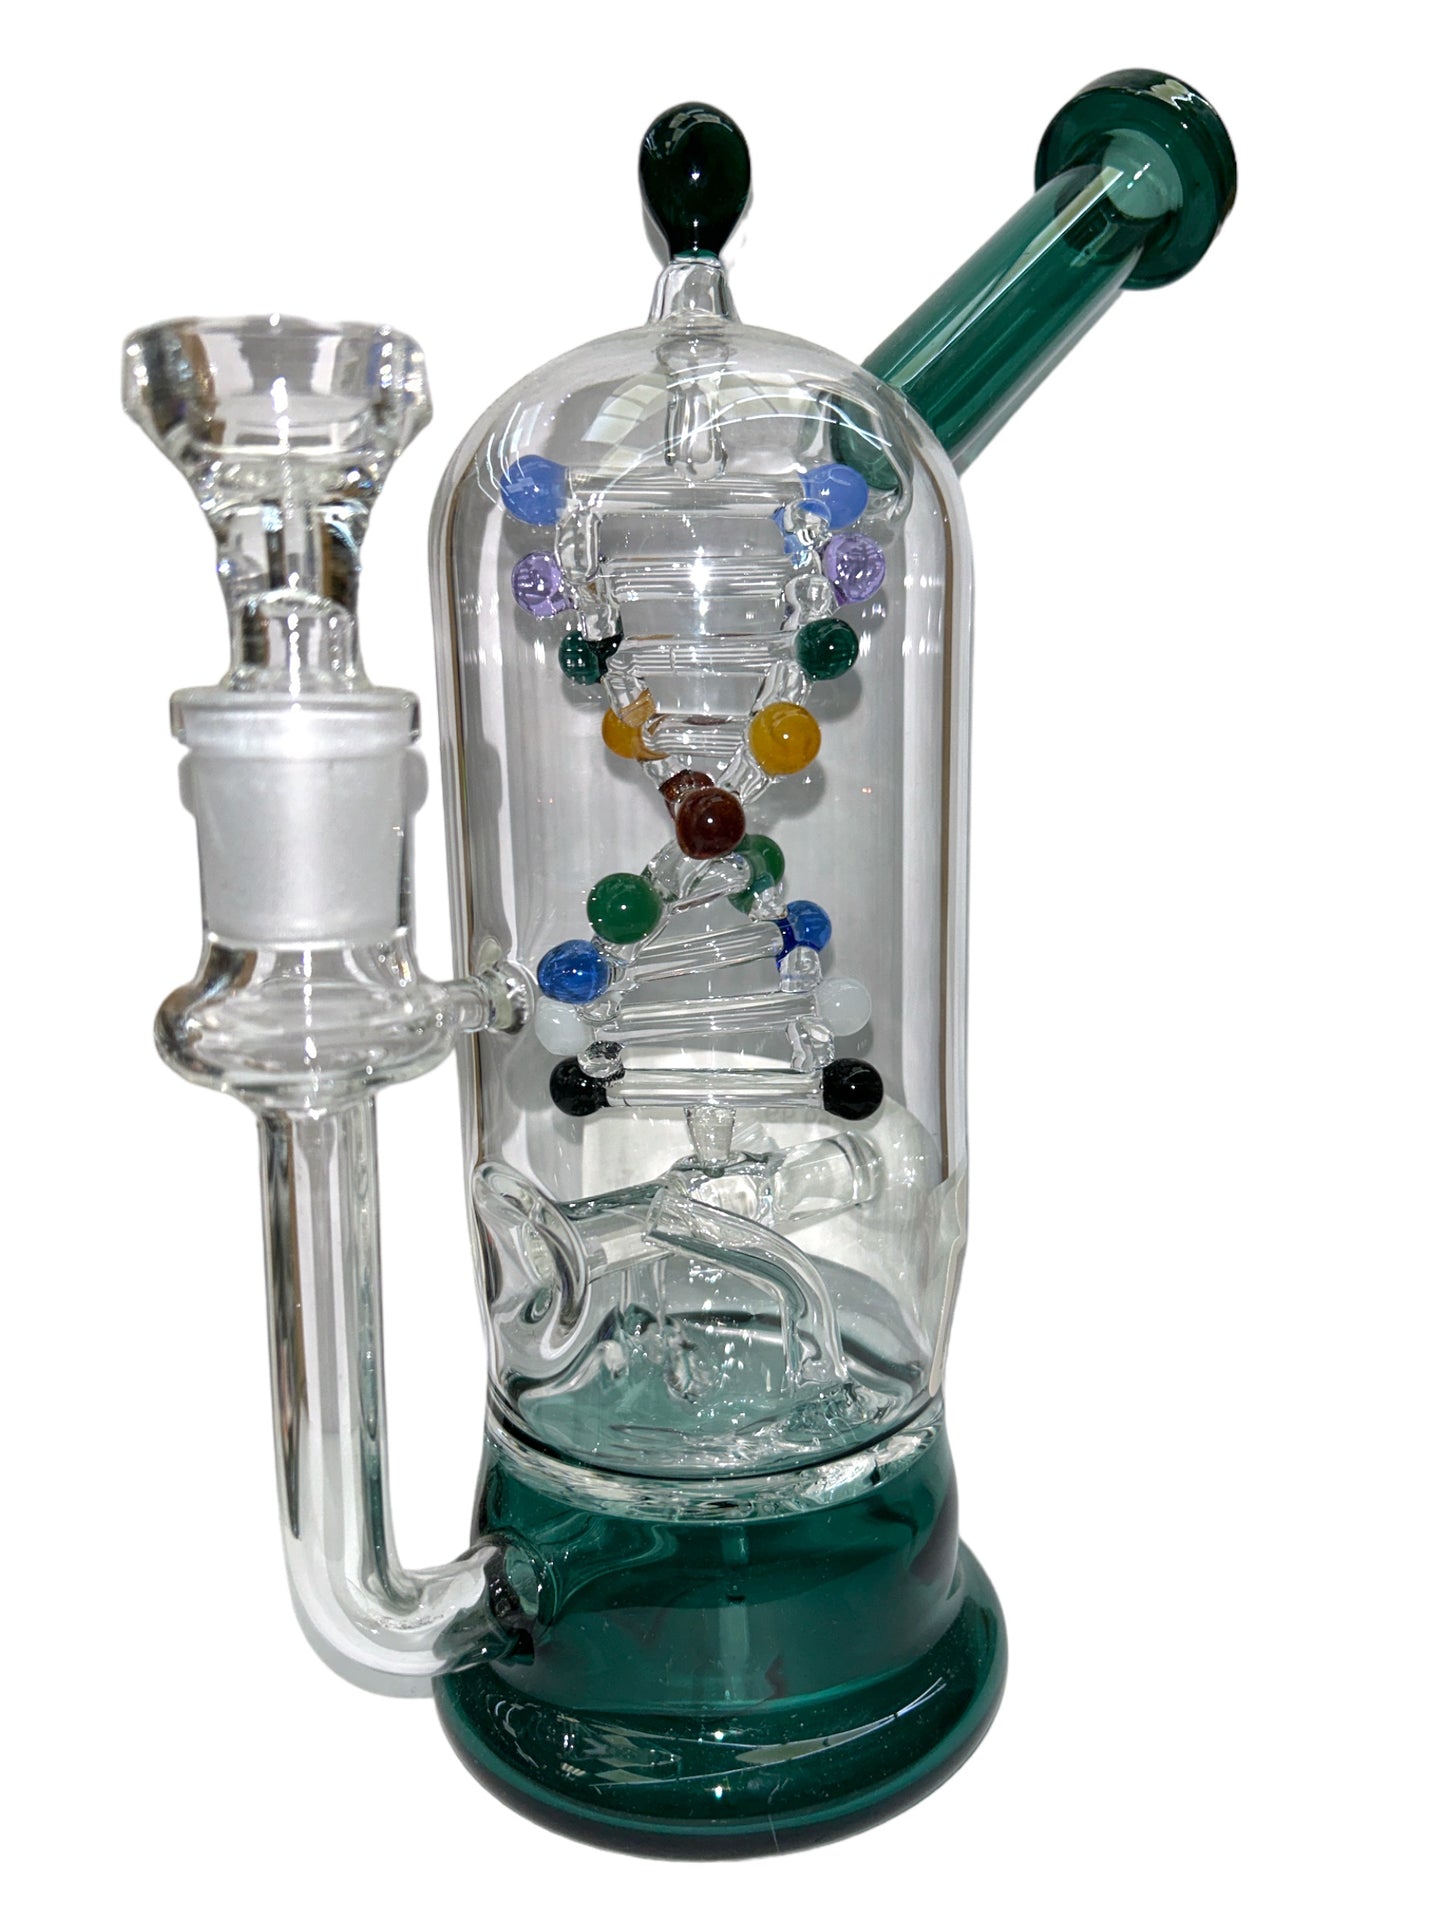 9” twisting Double Helix DNA Water Pipes